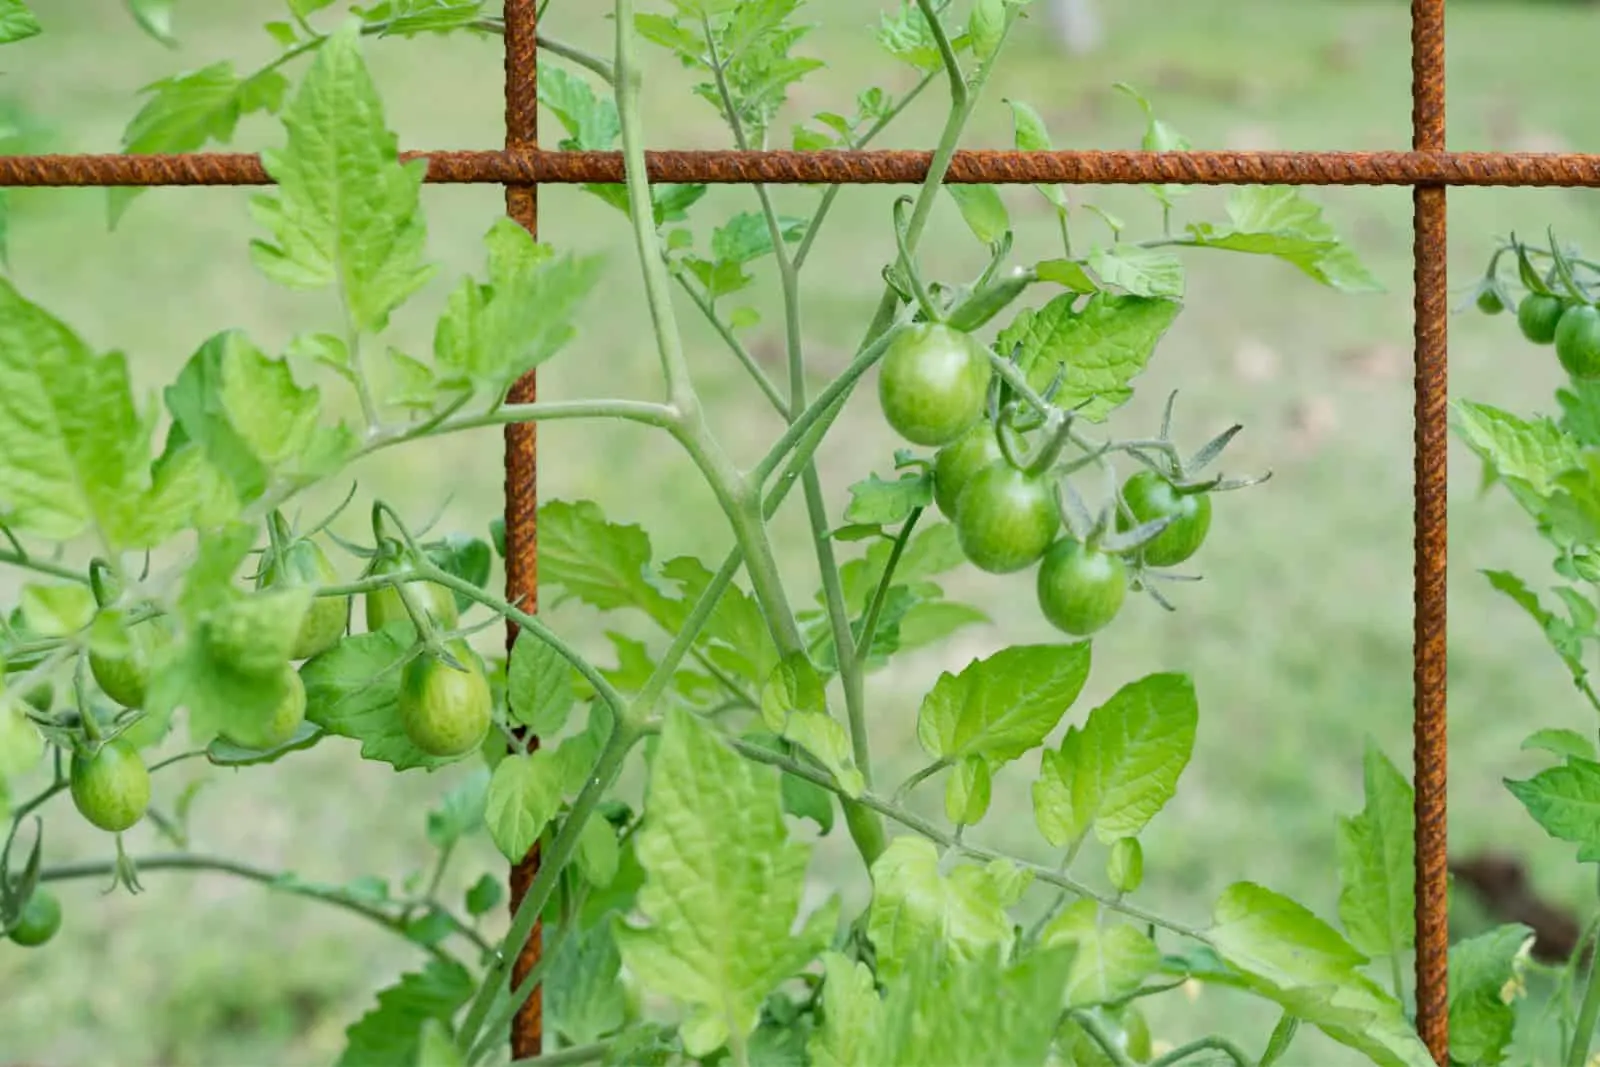 Trusses of grape tomatoes and cherry tomatoes growing on a mesh trellis